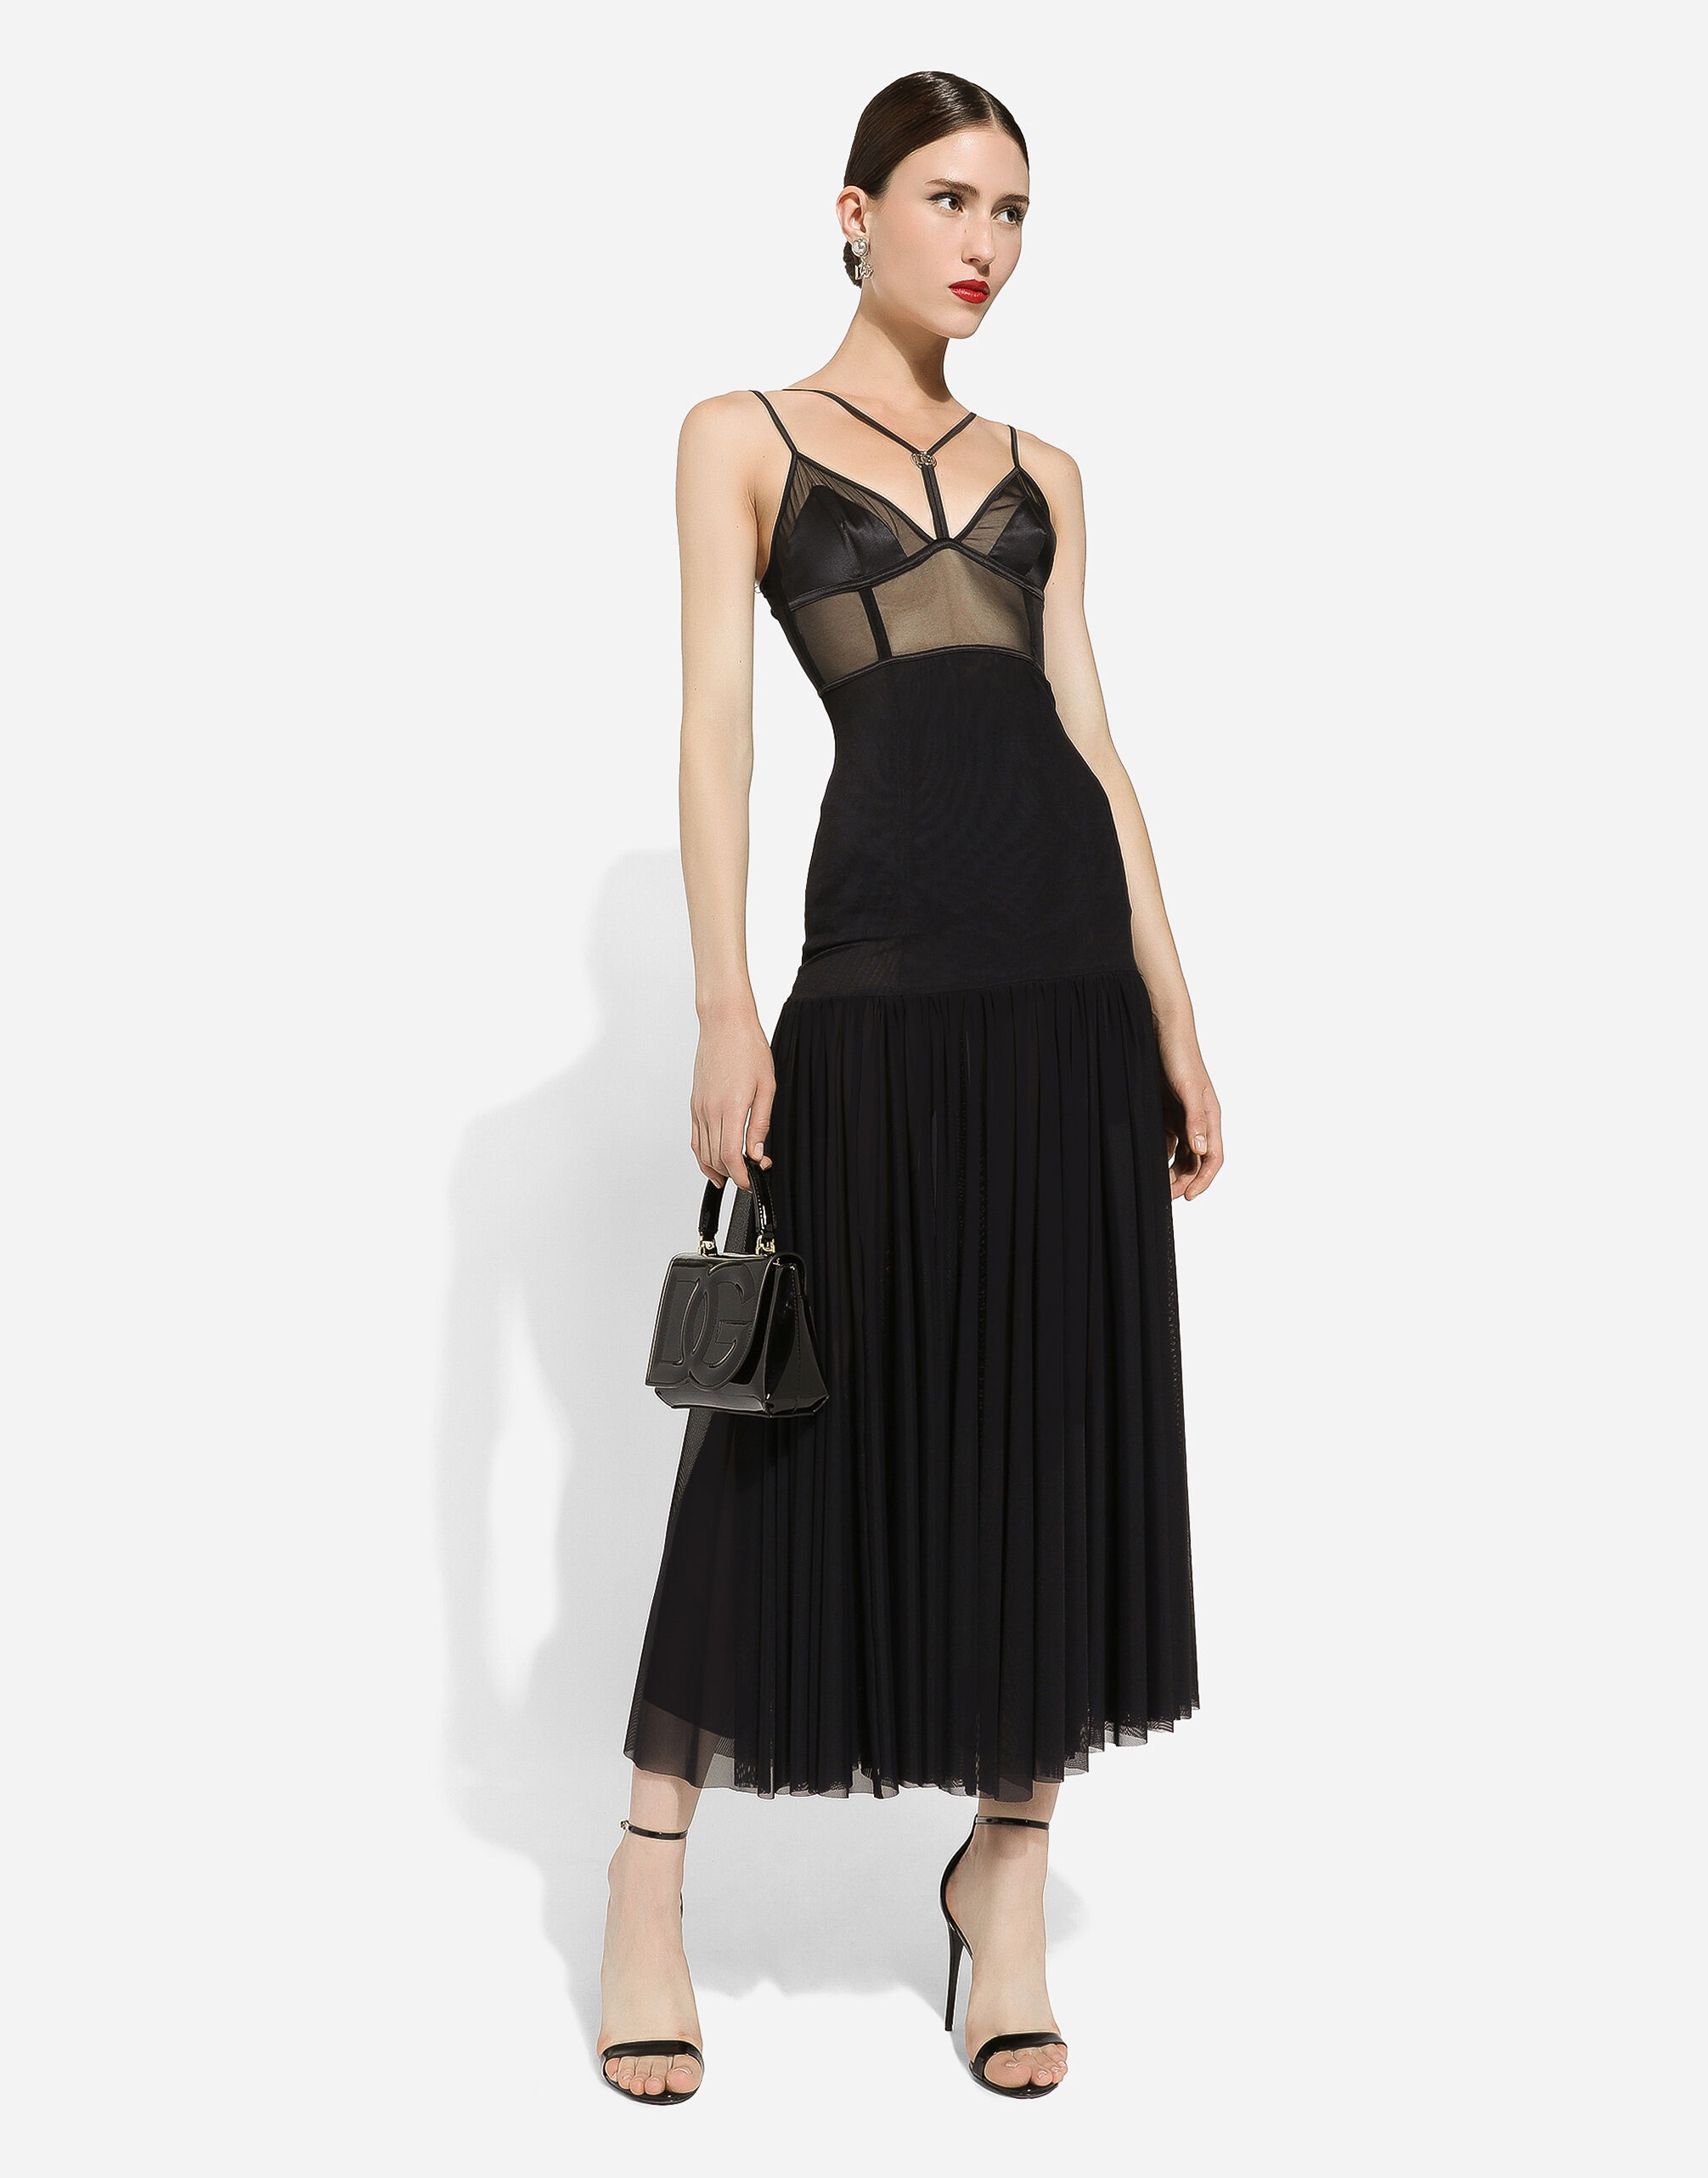 Tulle midi dress with lingerie details and the DG logo - 5